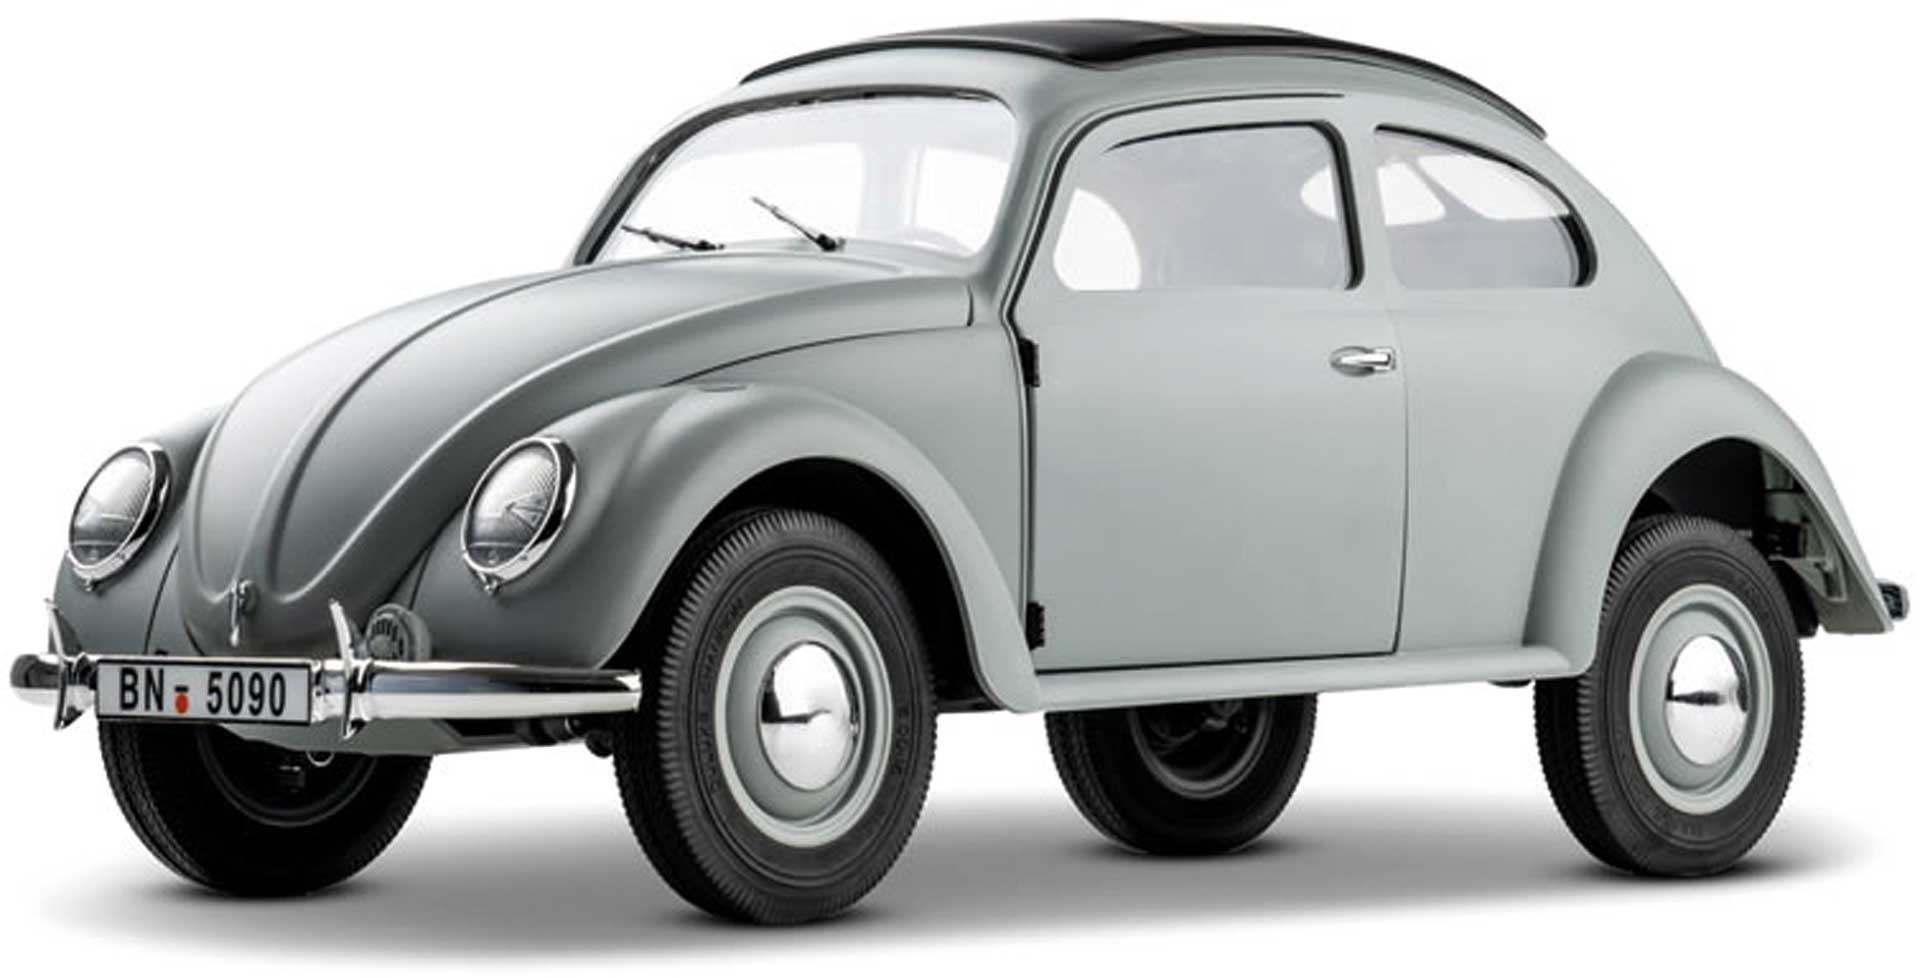 ROC HOBBY Beetle "the Peoples Car" 1:12 - Scaler RTR 2.4Ghz